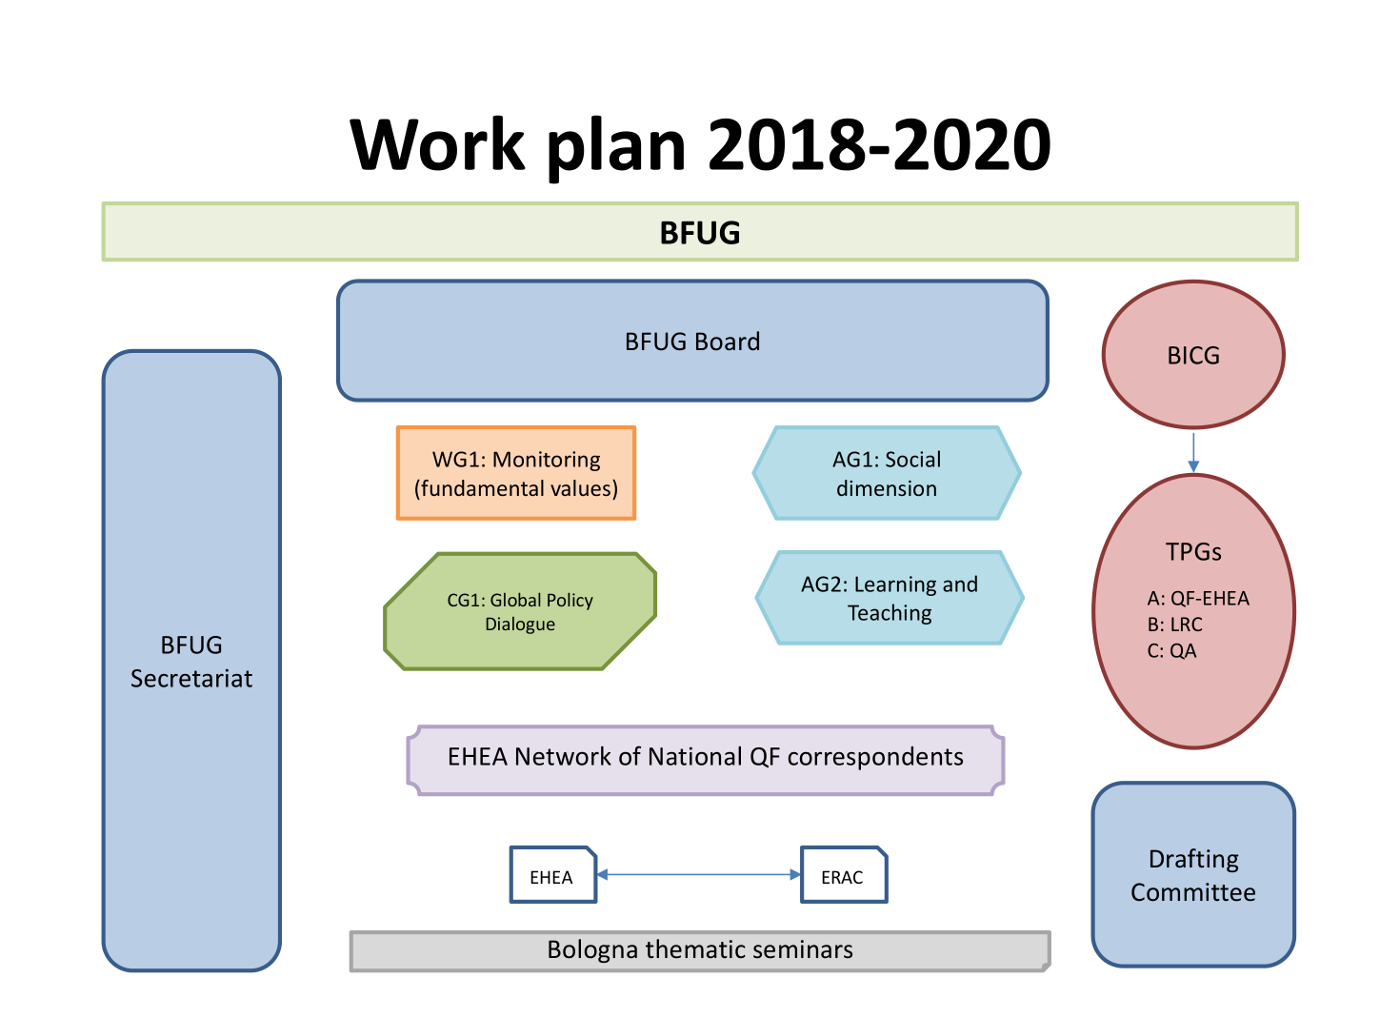 The work plan 2018-2020 of the Bologna Follow-Up Group is described in the form of a diagram. Actors such as BFUG, BFUG Board, BFUG Secretariat, Working Groups and Advisory Groups are represented. The relationship of subordination between the BFUG and its working and advisory groups have been indicated.